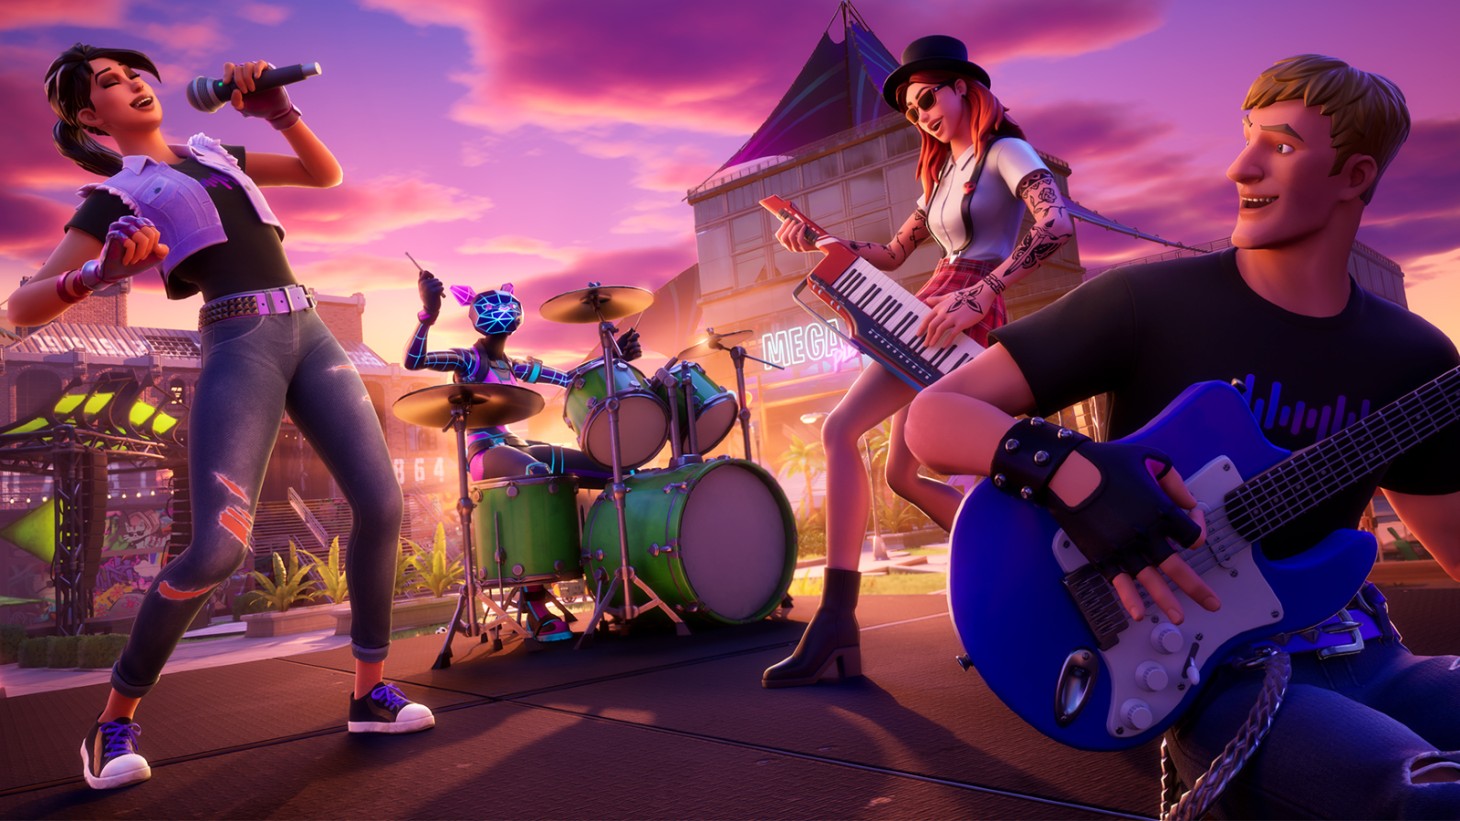 Epic Games is using the new 'Fortnite' season launch to support